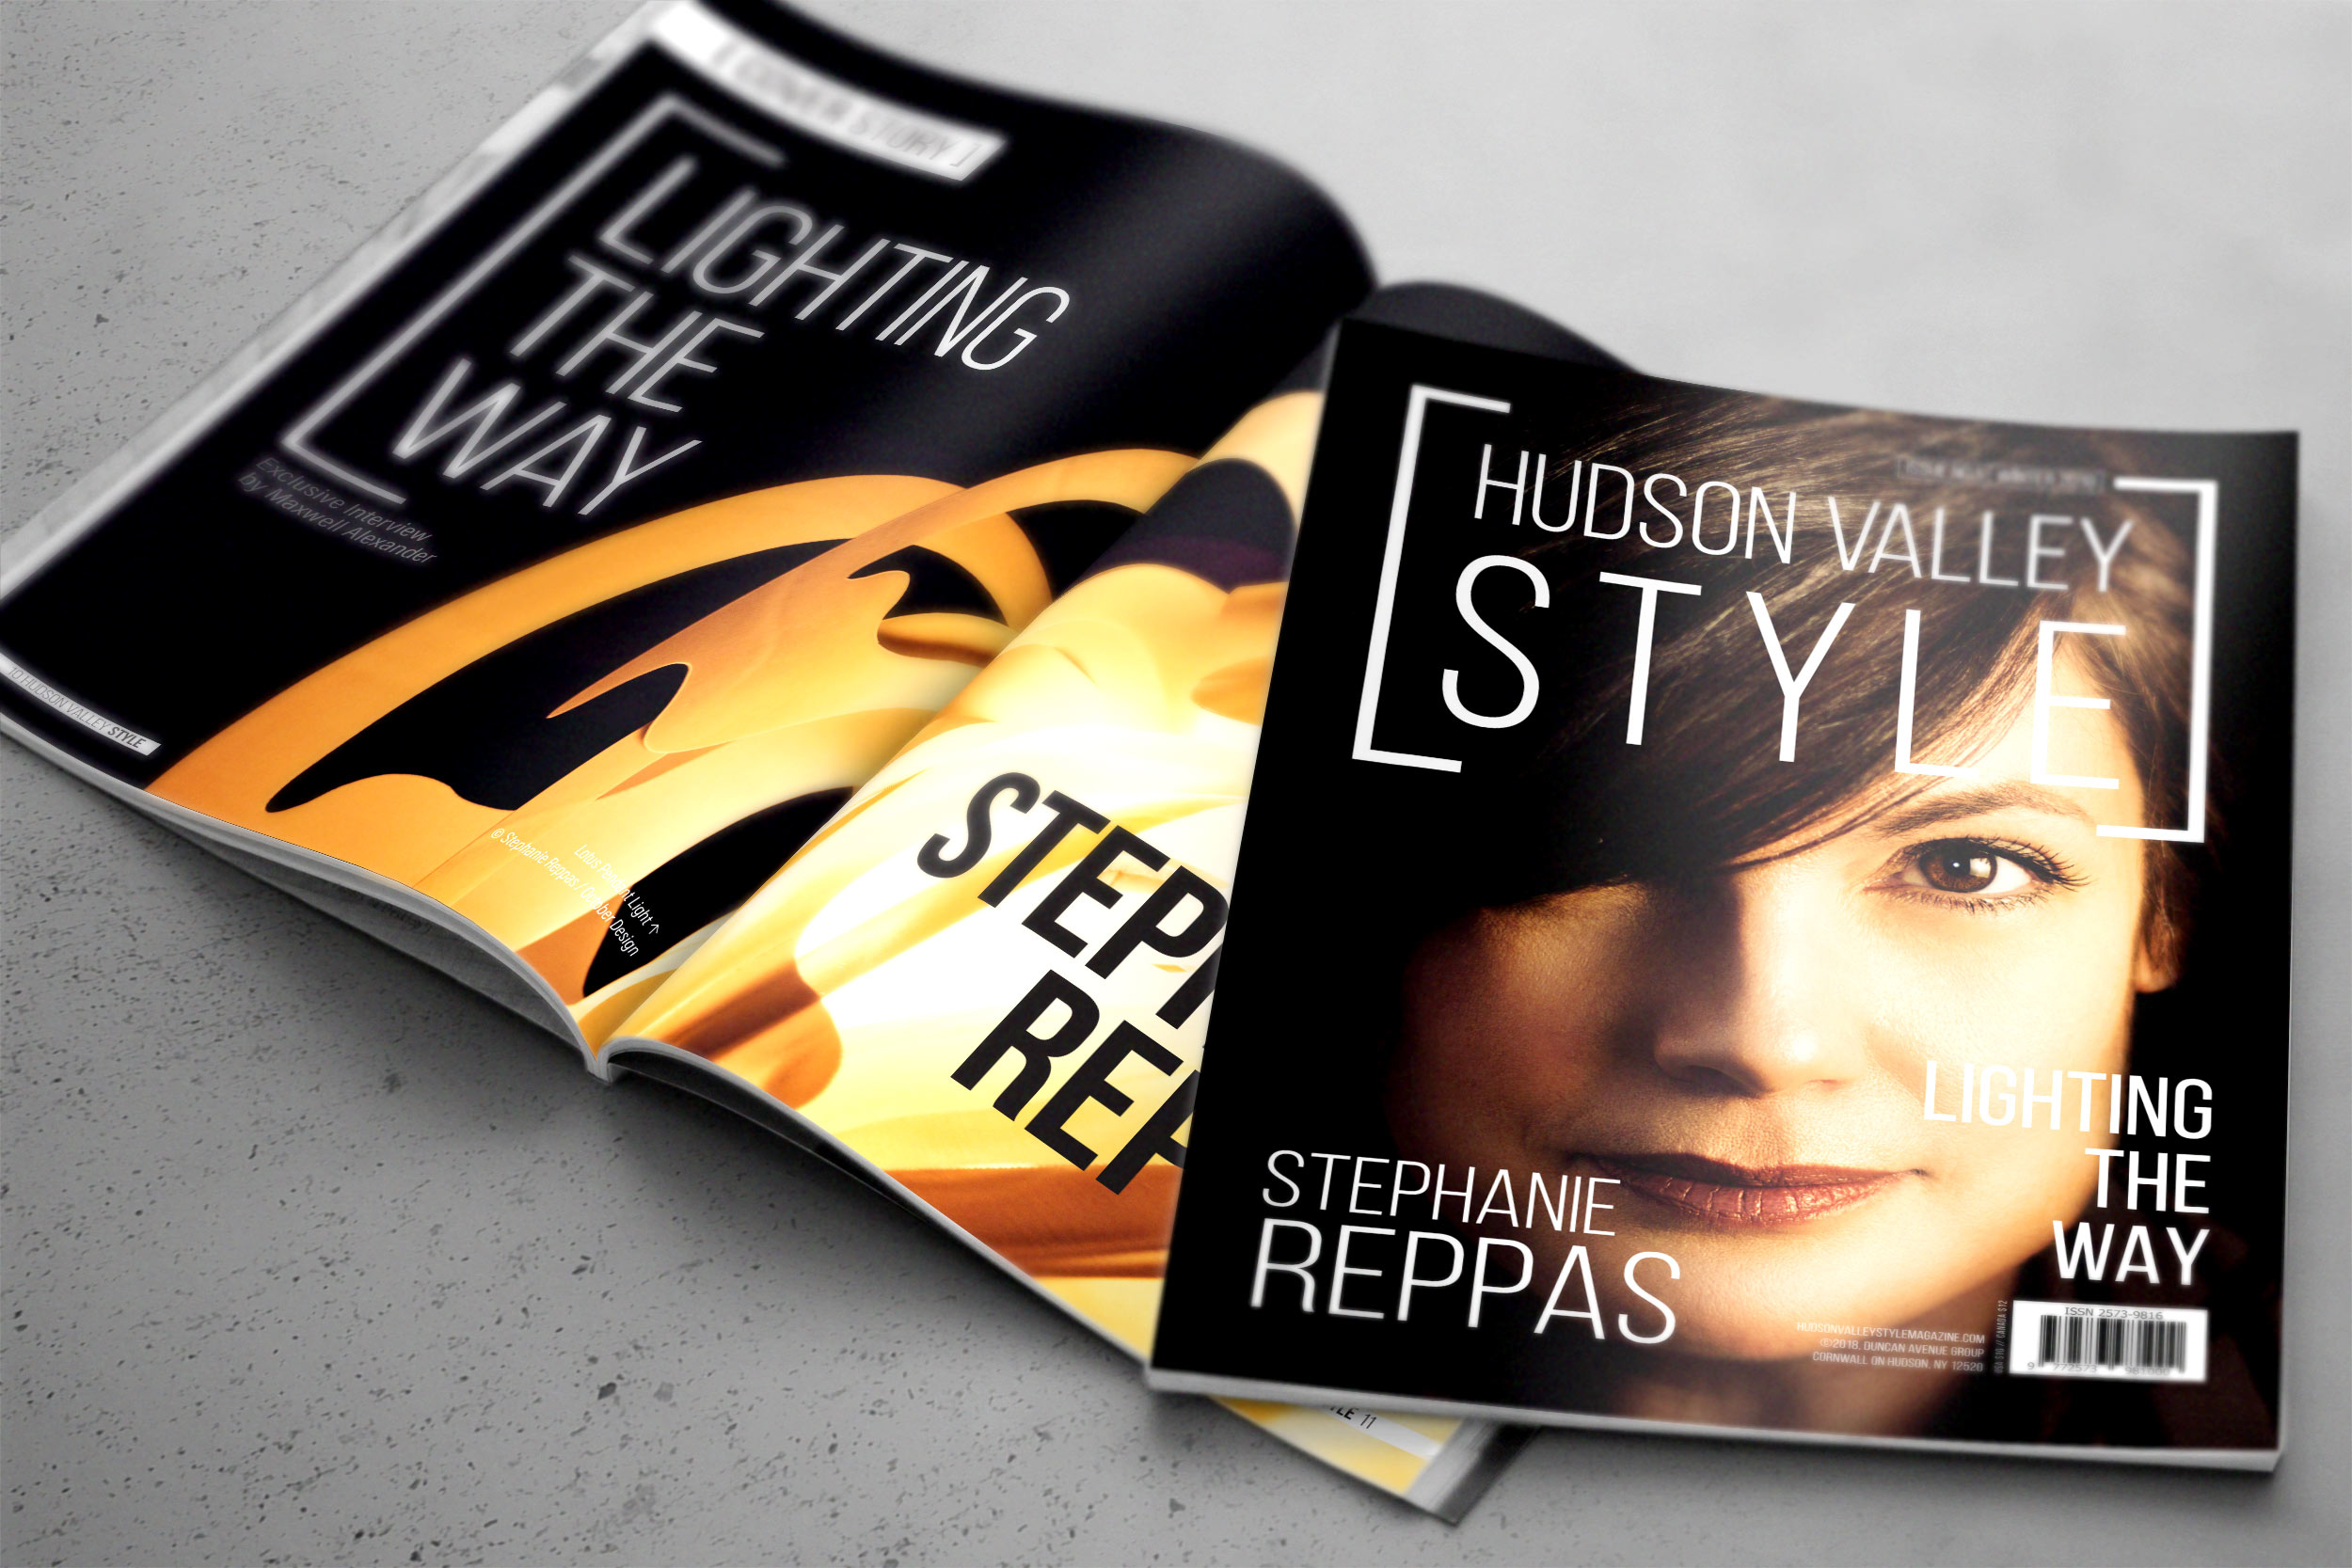 Hudson Valley Style Magazine - Issue No.5 - Stephanie Reppas -Lighting the Way 2018